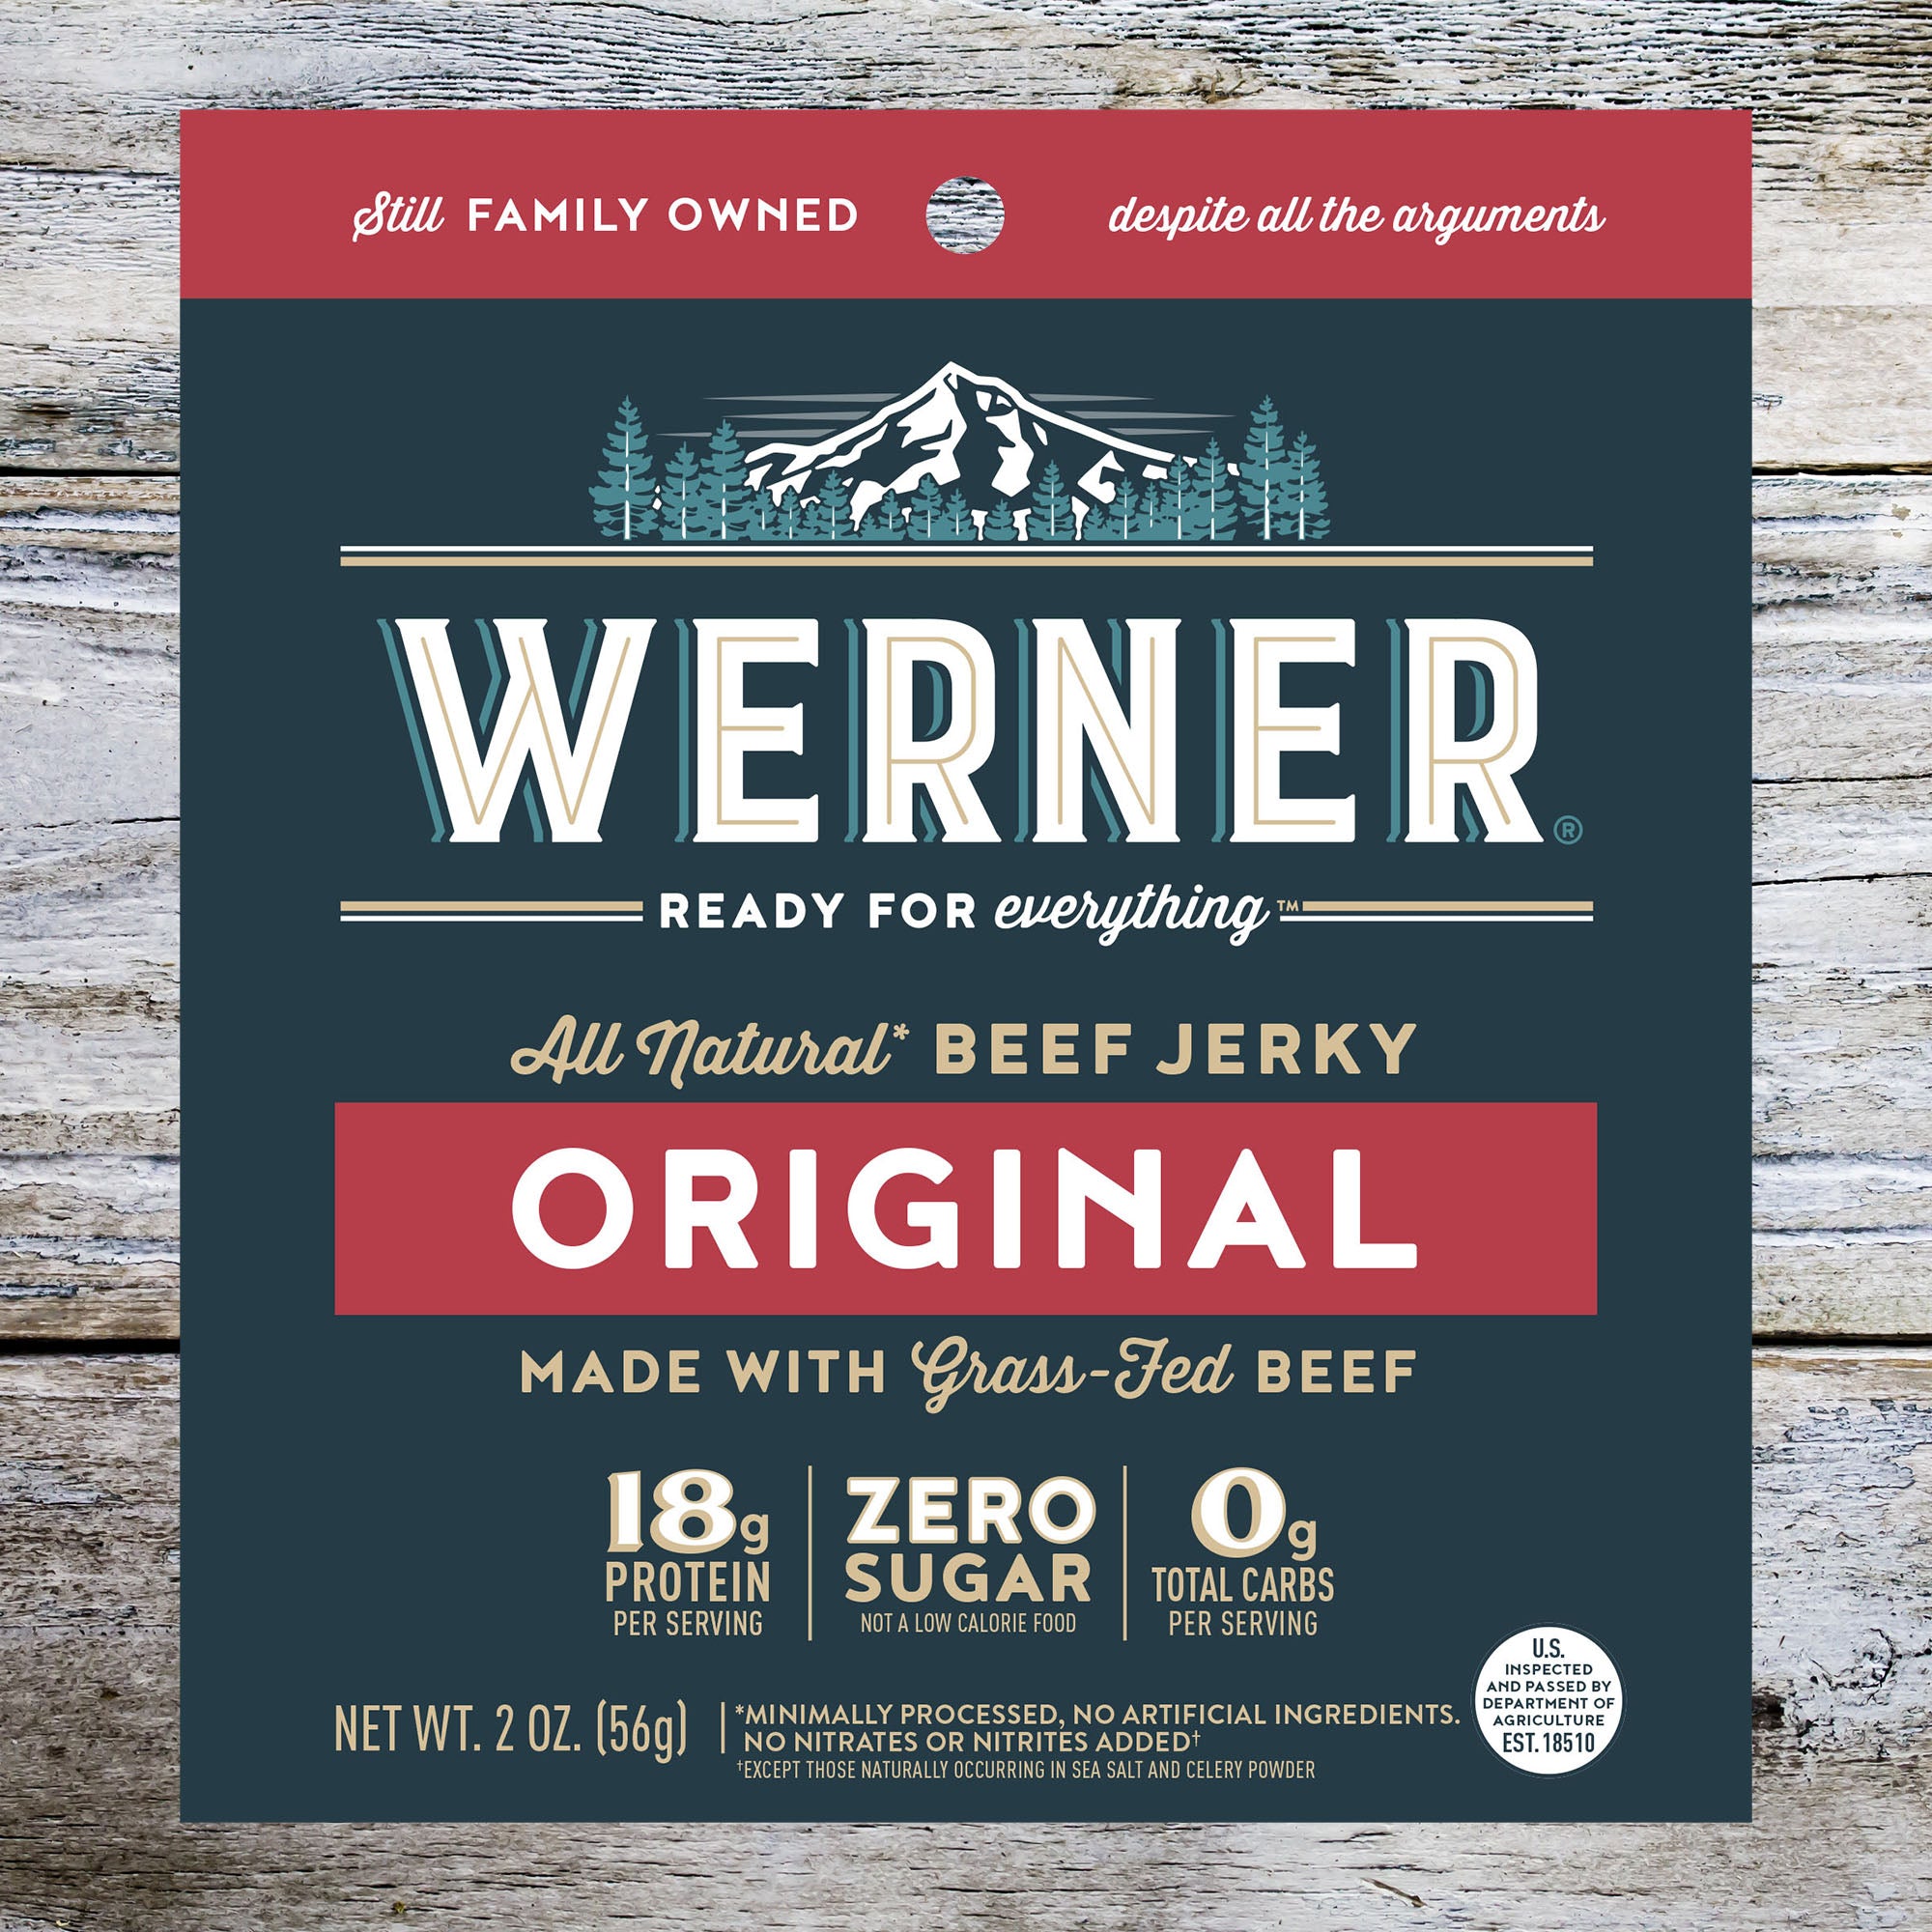 Zero Sugar and Grass-Fed Beef Pair Well in New Jerky from Werner Gourmet Meat Snacks, Inc.